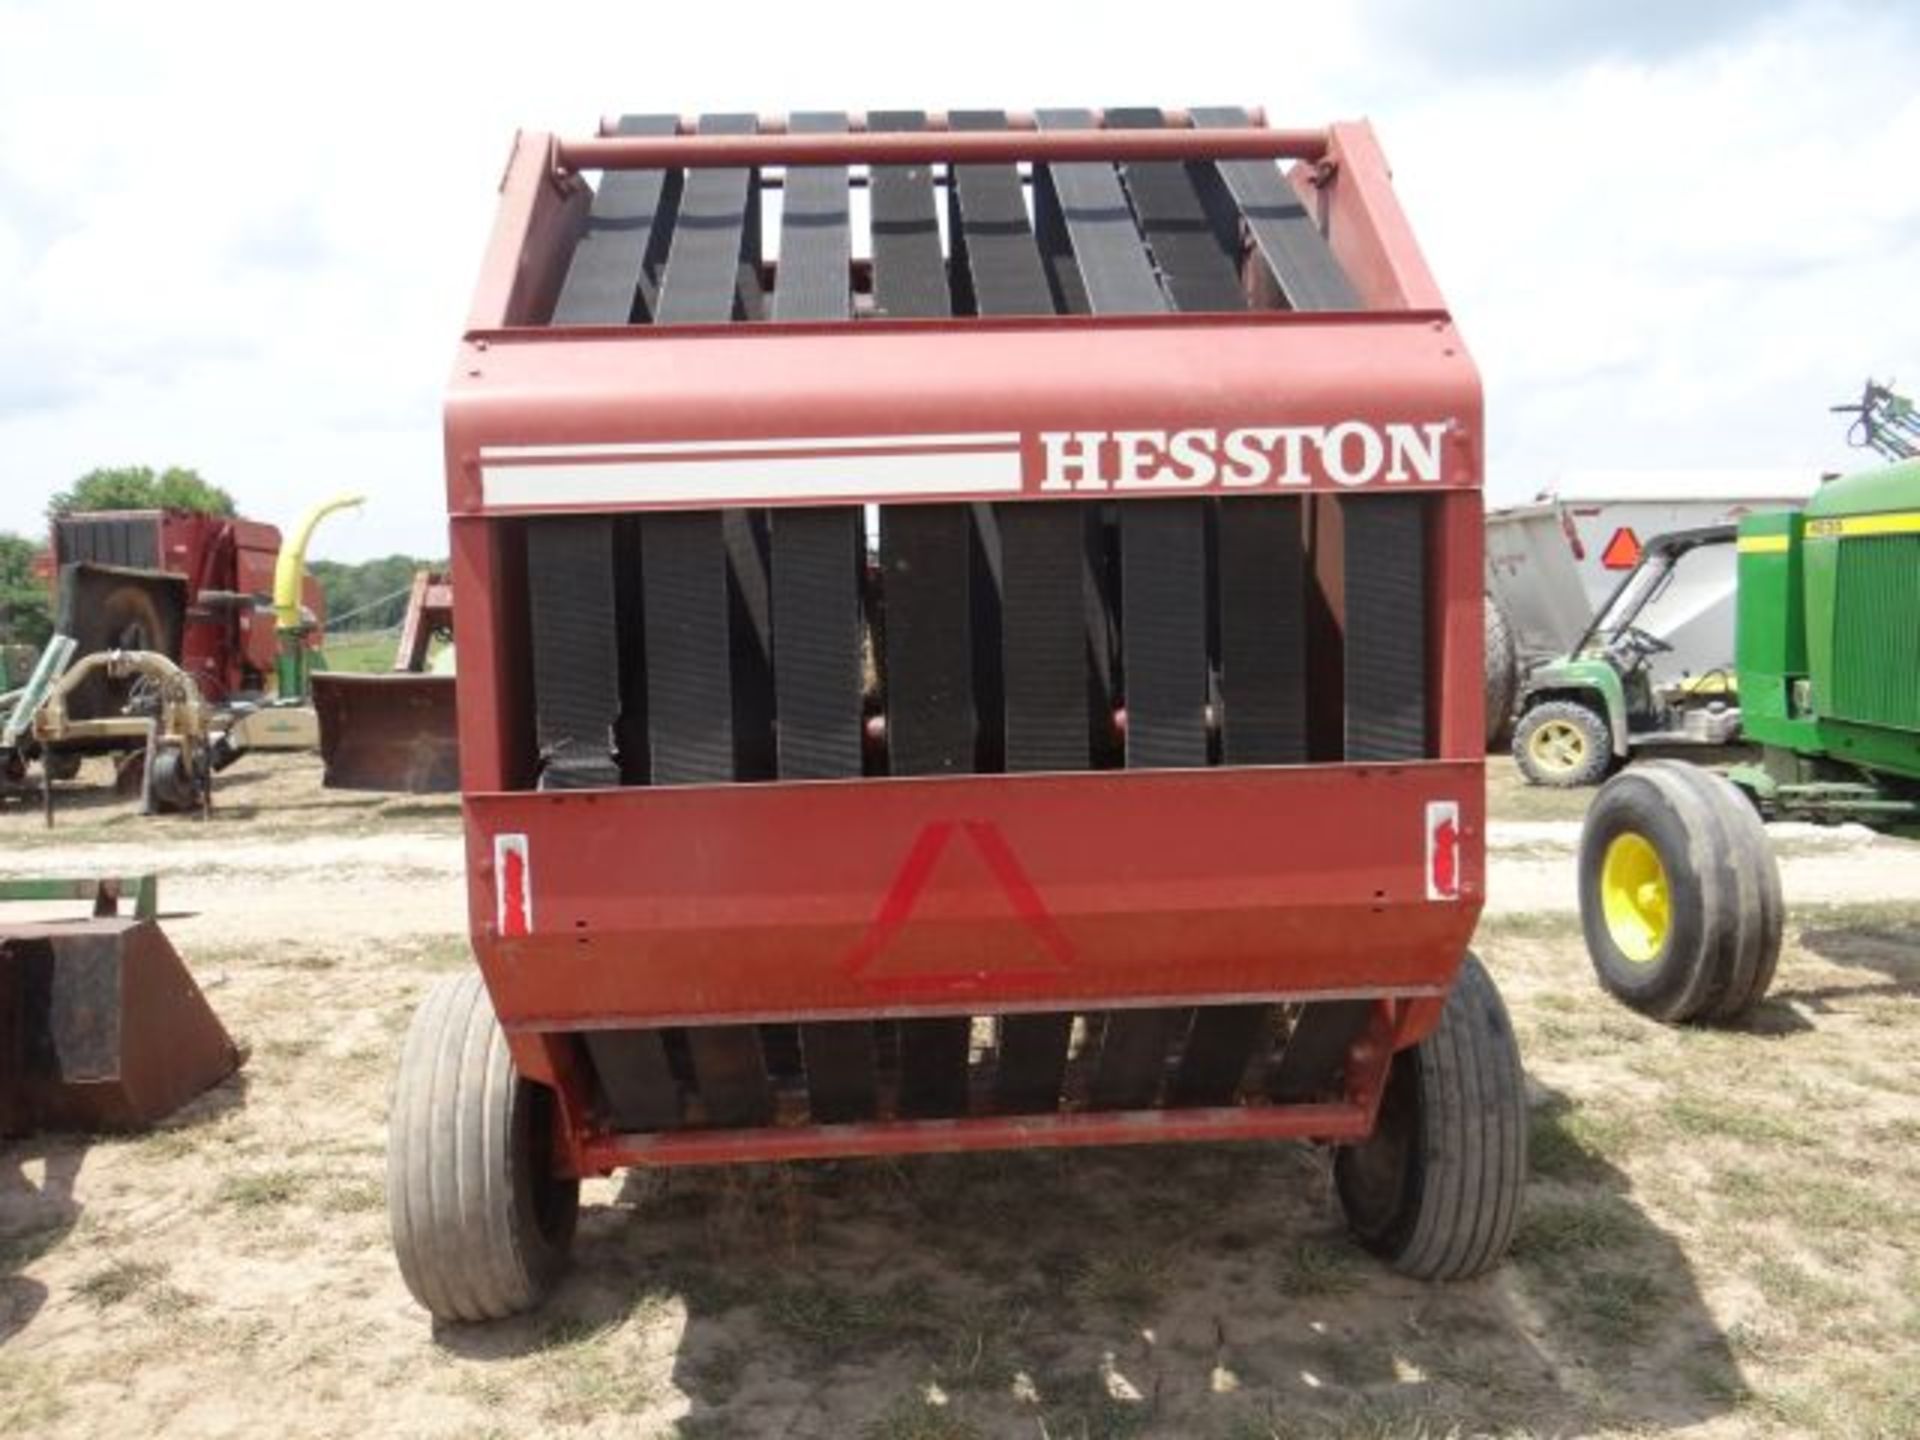 Hesston 5580 Round Baler Twine Only, Works Good, Monitor in the Shed - Image 3 of 3